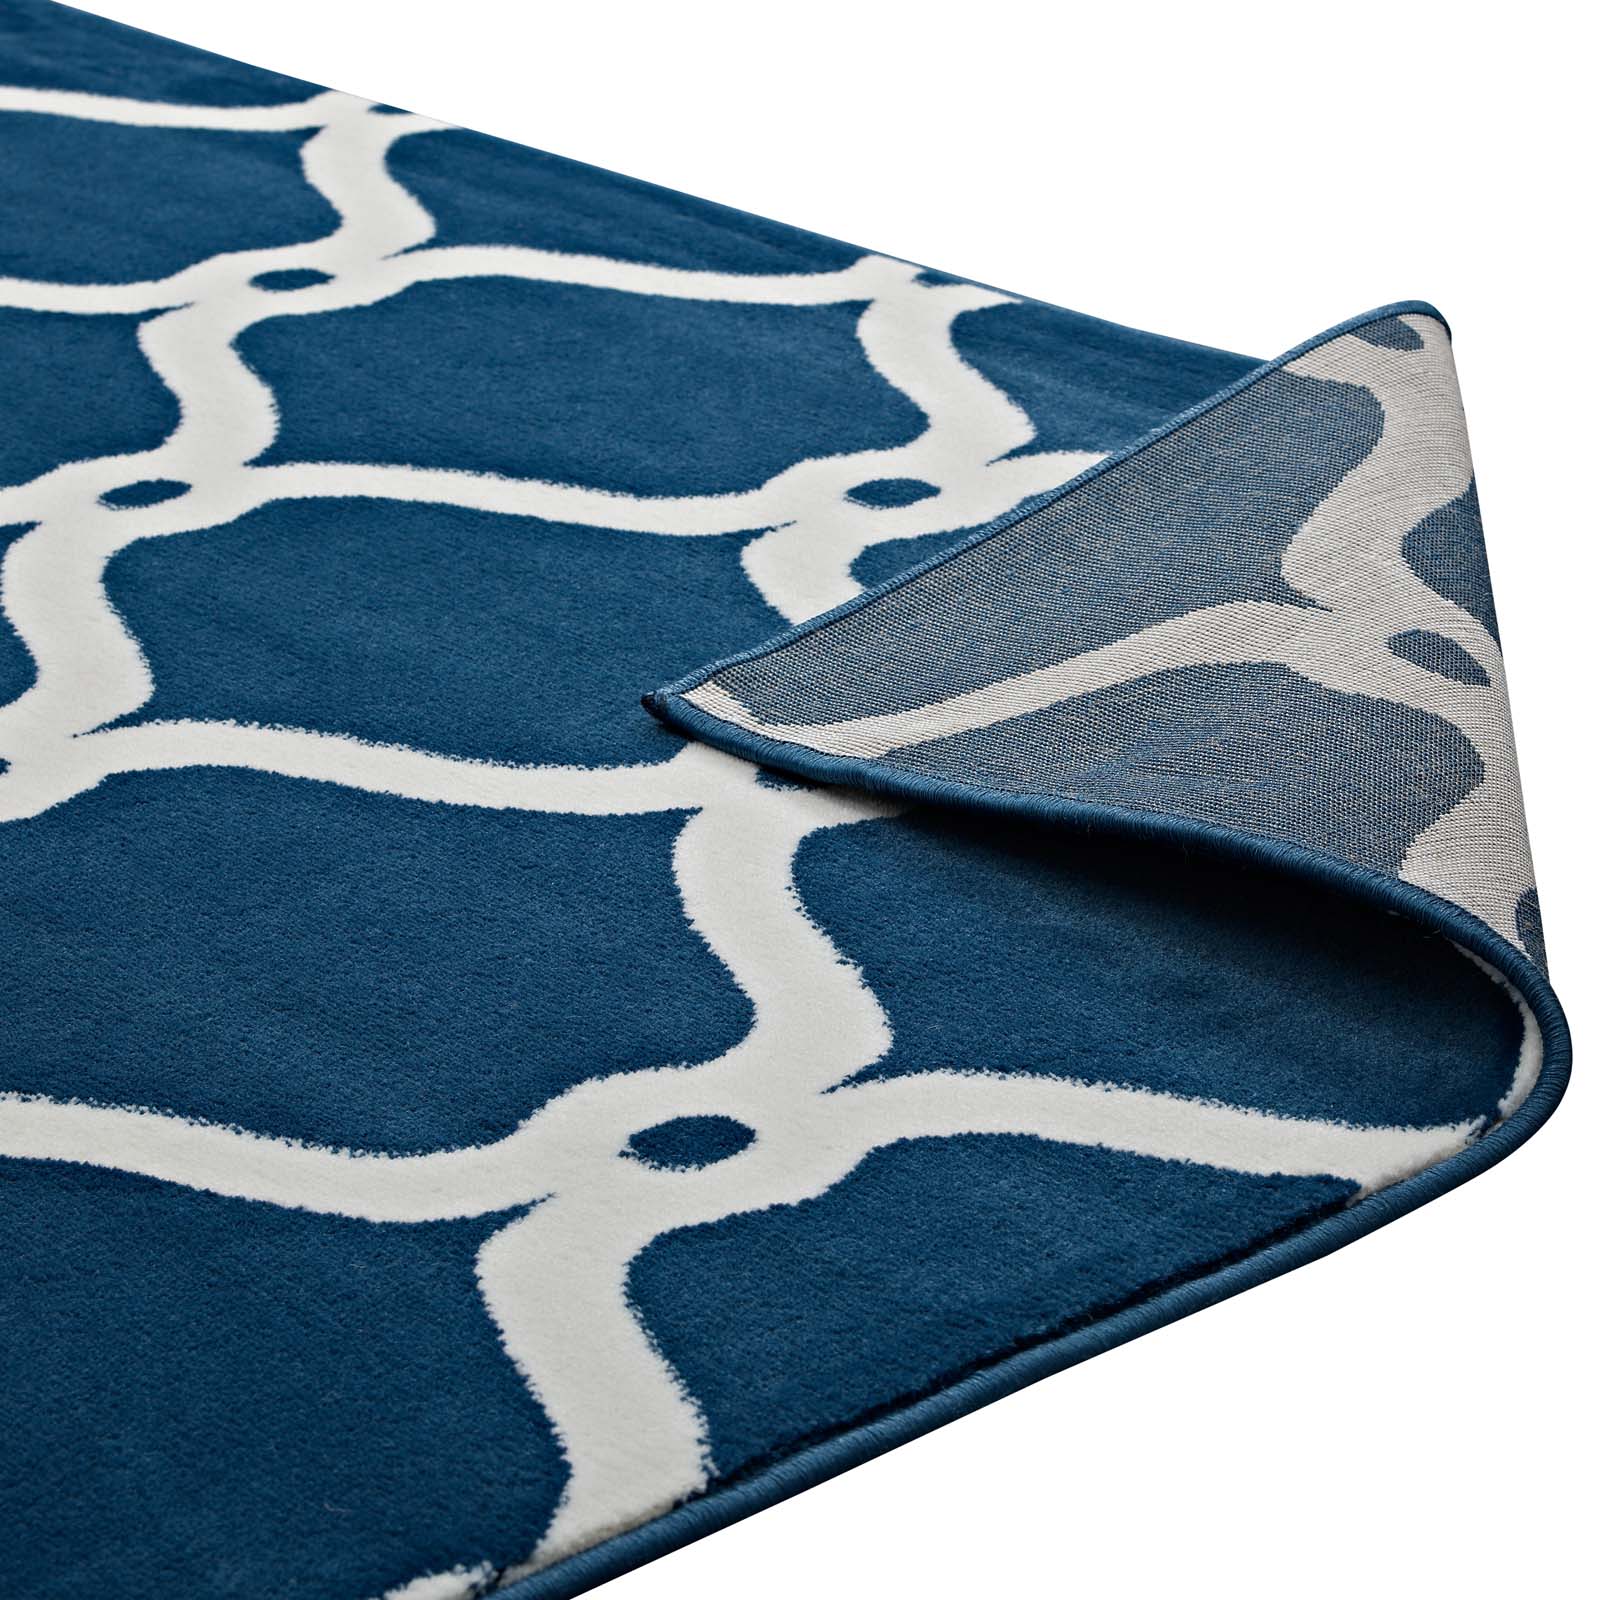 Modway Indoor Rugs - Beltara Chain Link Transitional Trellis 5x8 Area Rug Moroccan Blue & Ivory